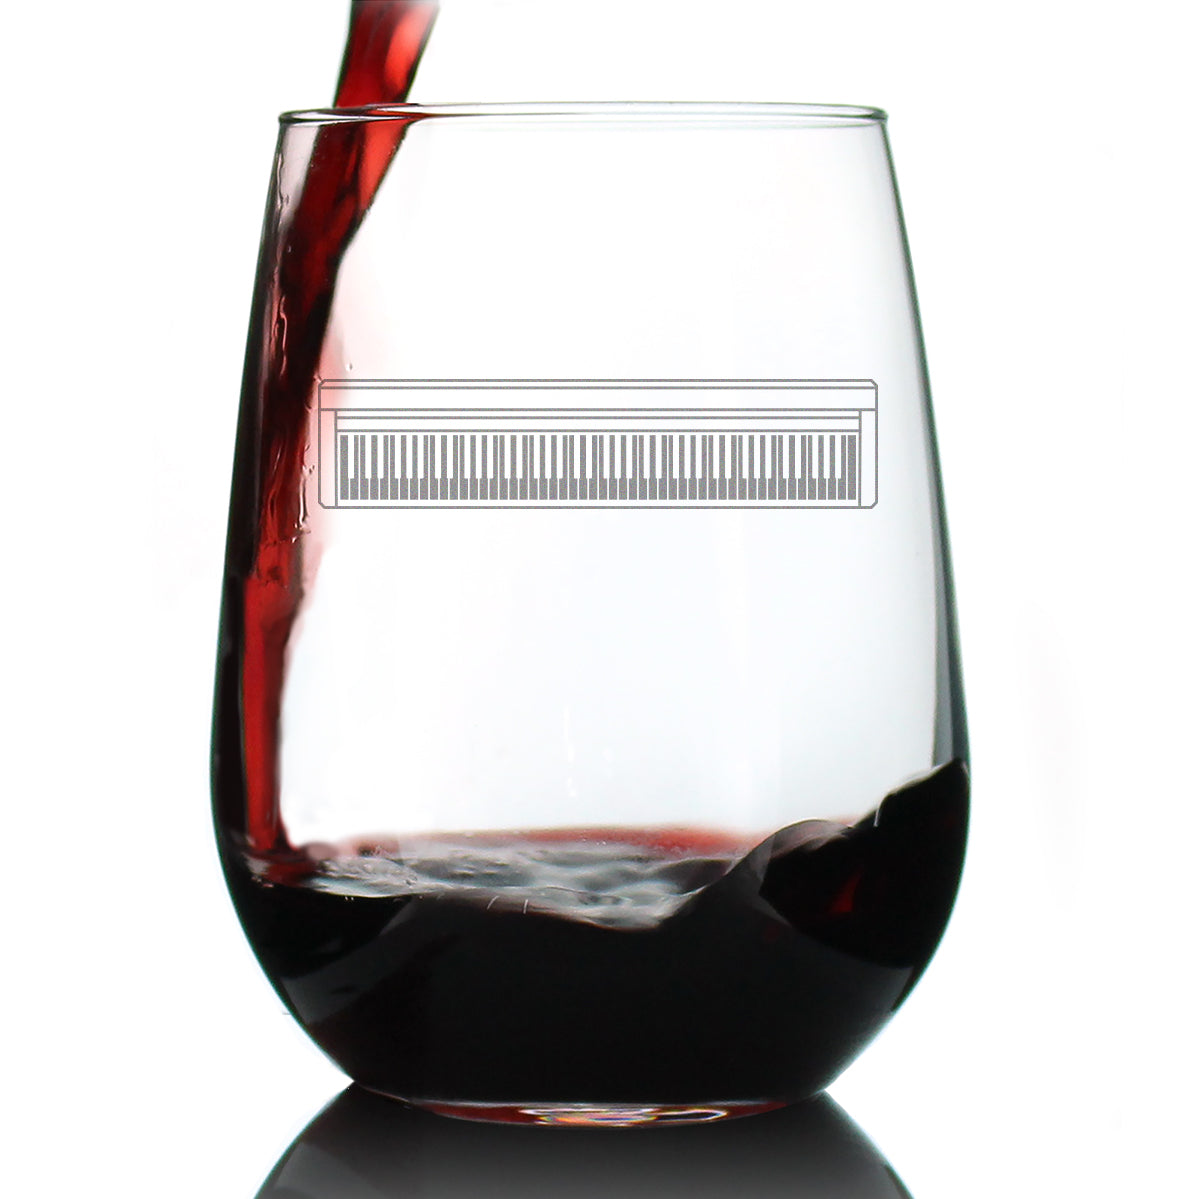 Piano Keyboard Stemless Wine Glass - Music Gifts for Musicians, Teachers and Musical Accessories for Women and Men that Play Keys - Large 17 Oz Glasses